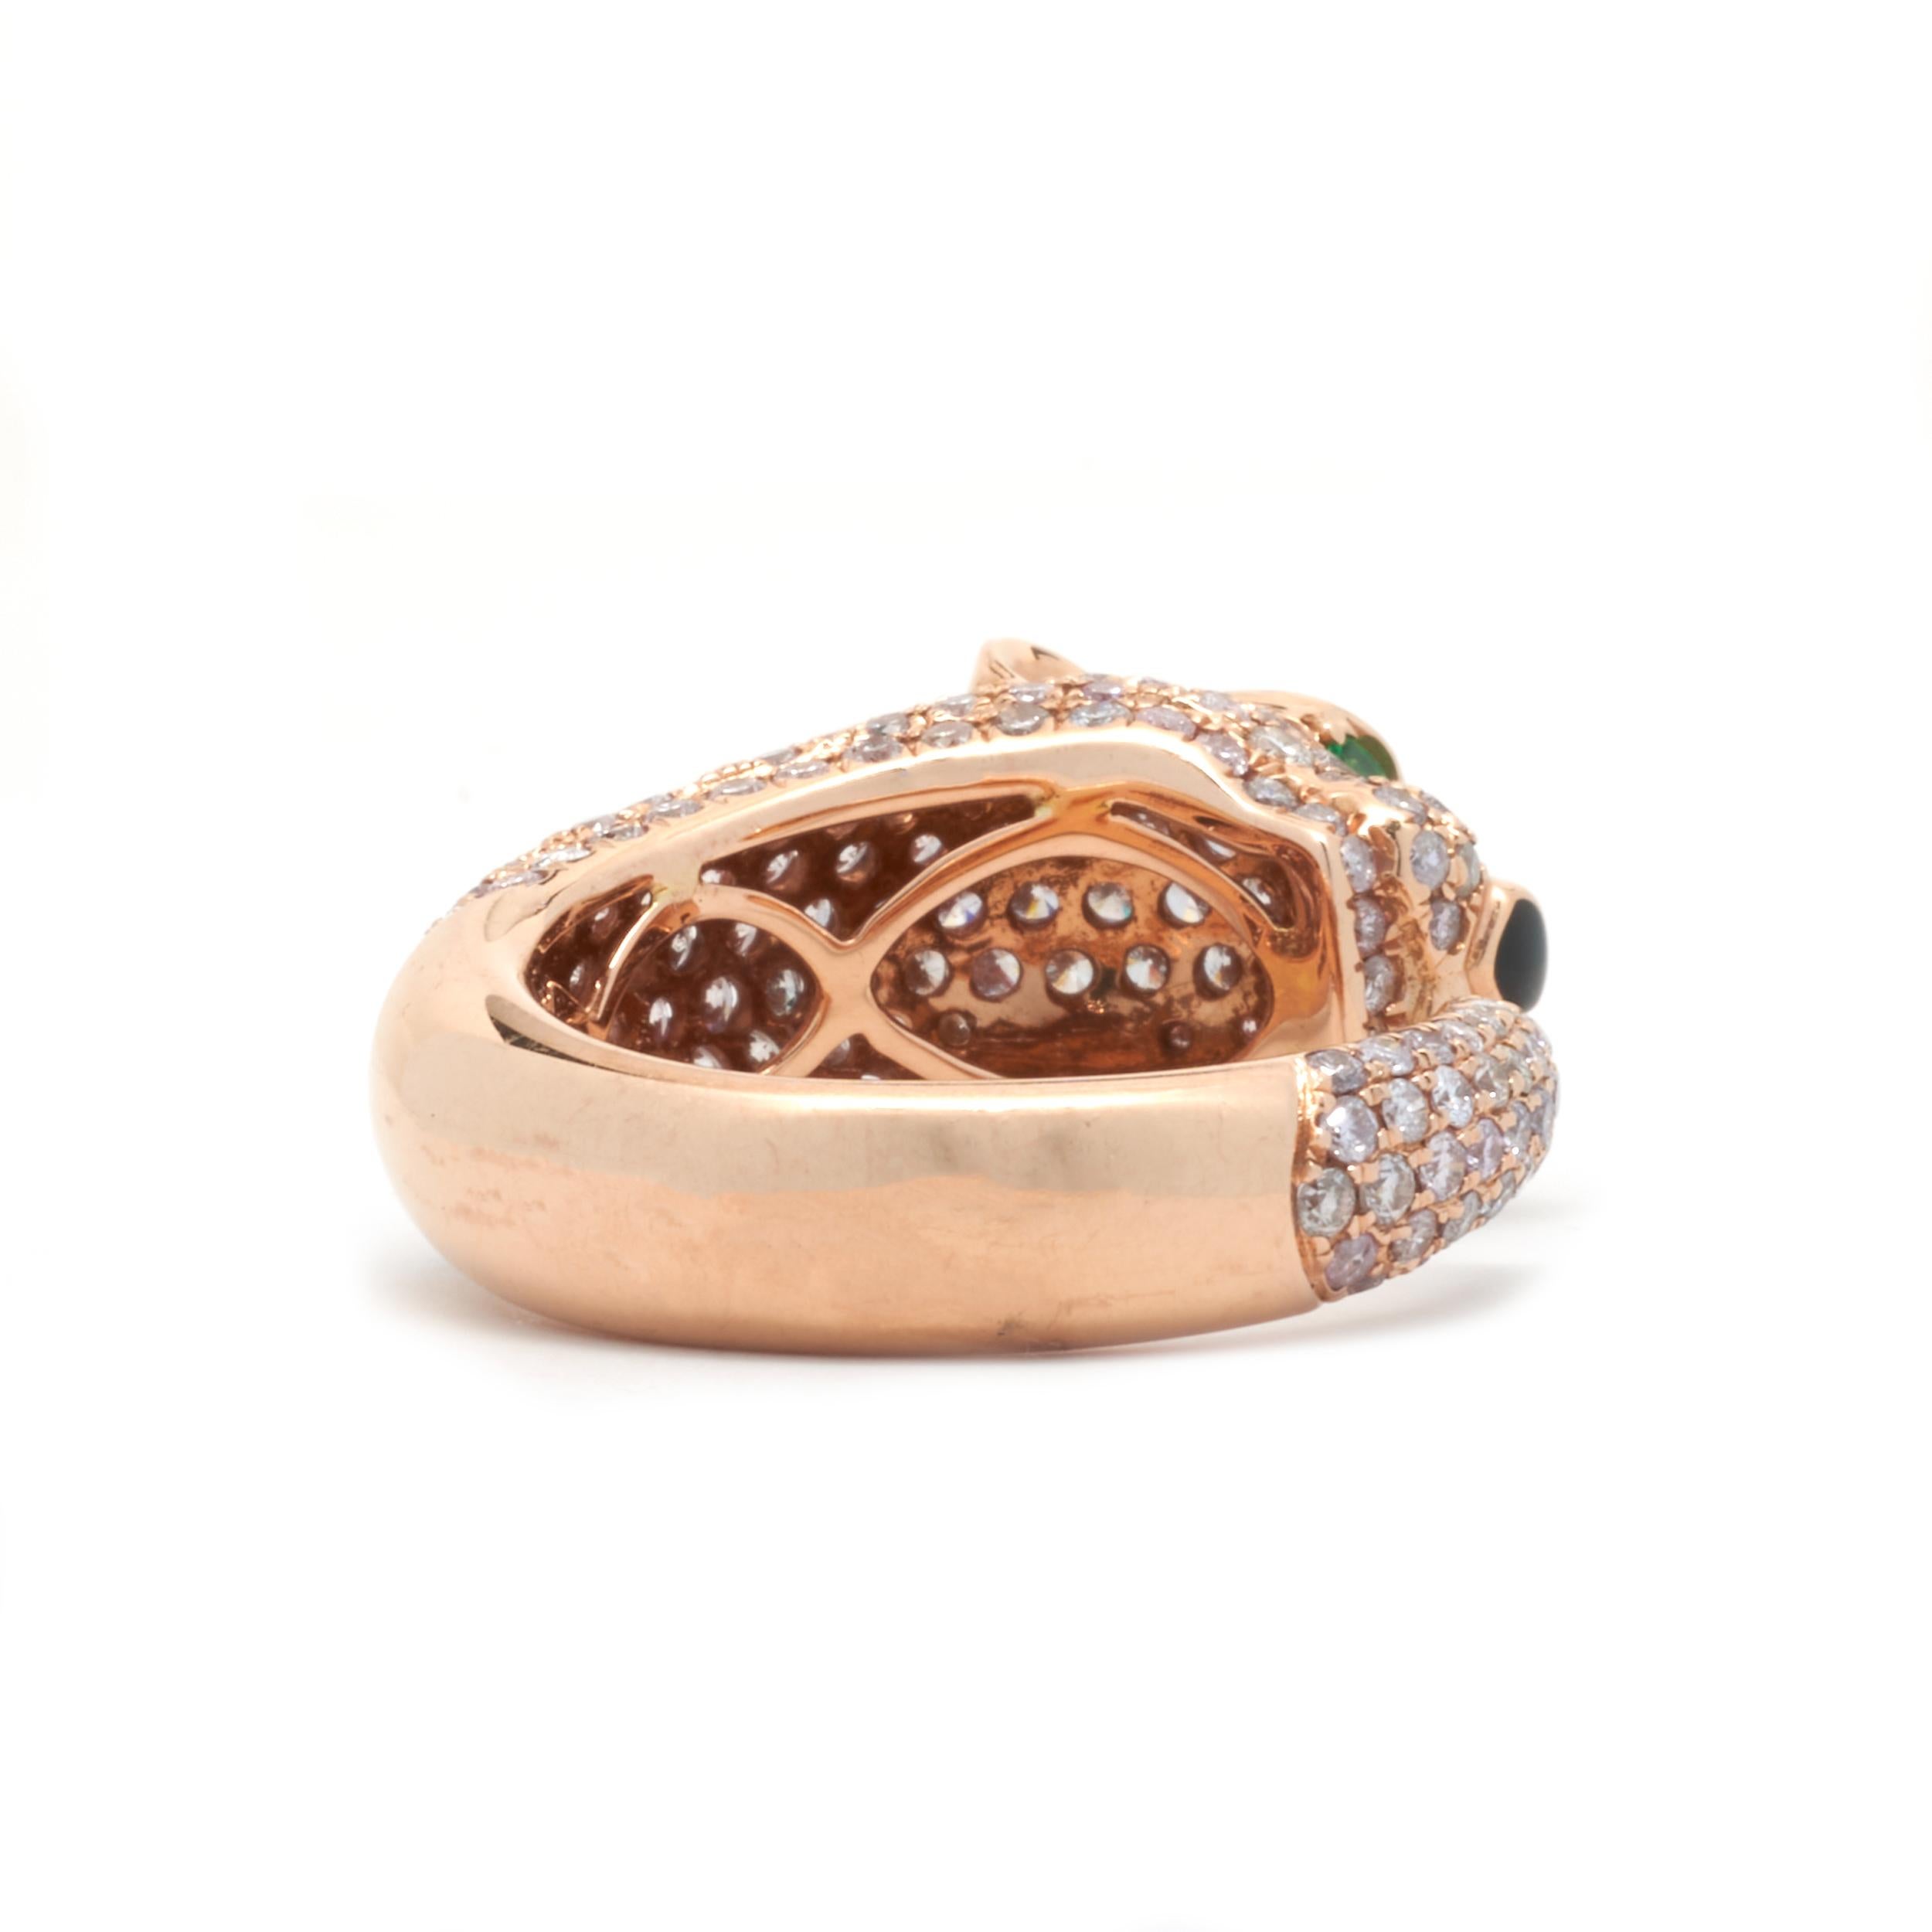 Designer: custom design
Material: 18k rose gold
Diamonds: 226 round brilliant cut= 2.65cttw
Color: G
Clarity: VS
Emerald: 2 round cut= .06cttw
Ring Size: 6 ½ (please allow two additional shipping day for sizing requests)
Dimensions: ring is